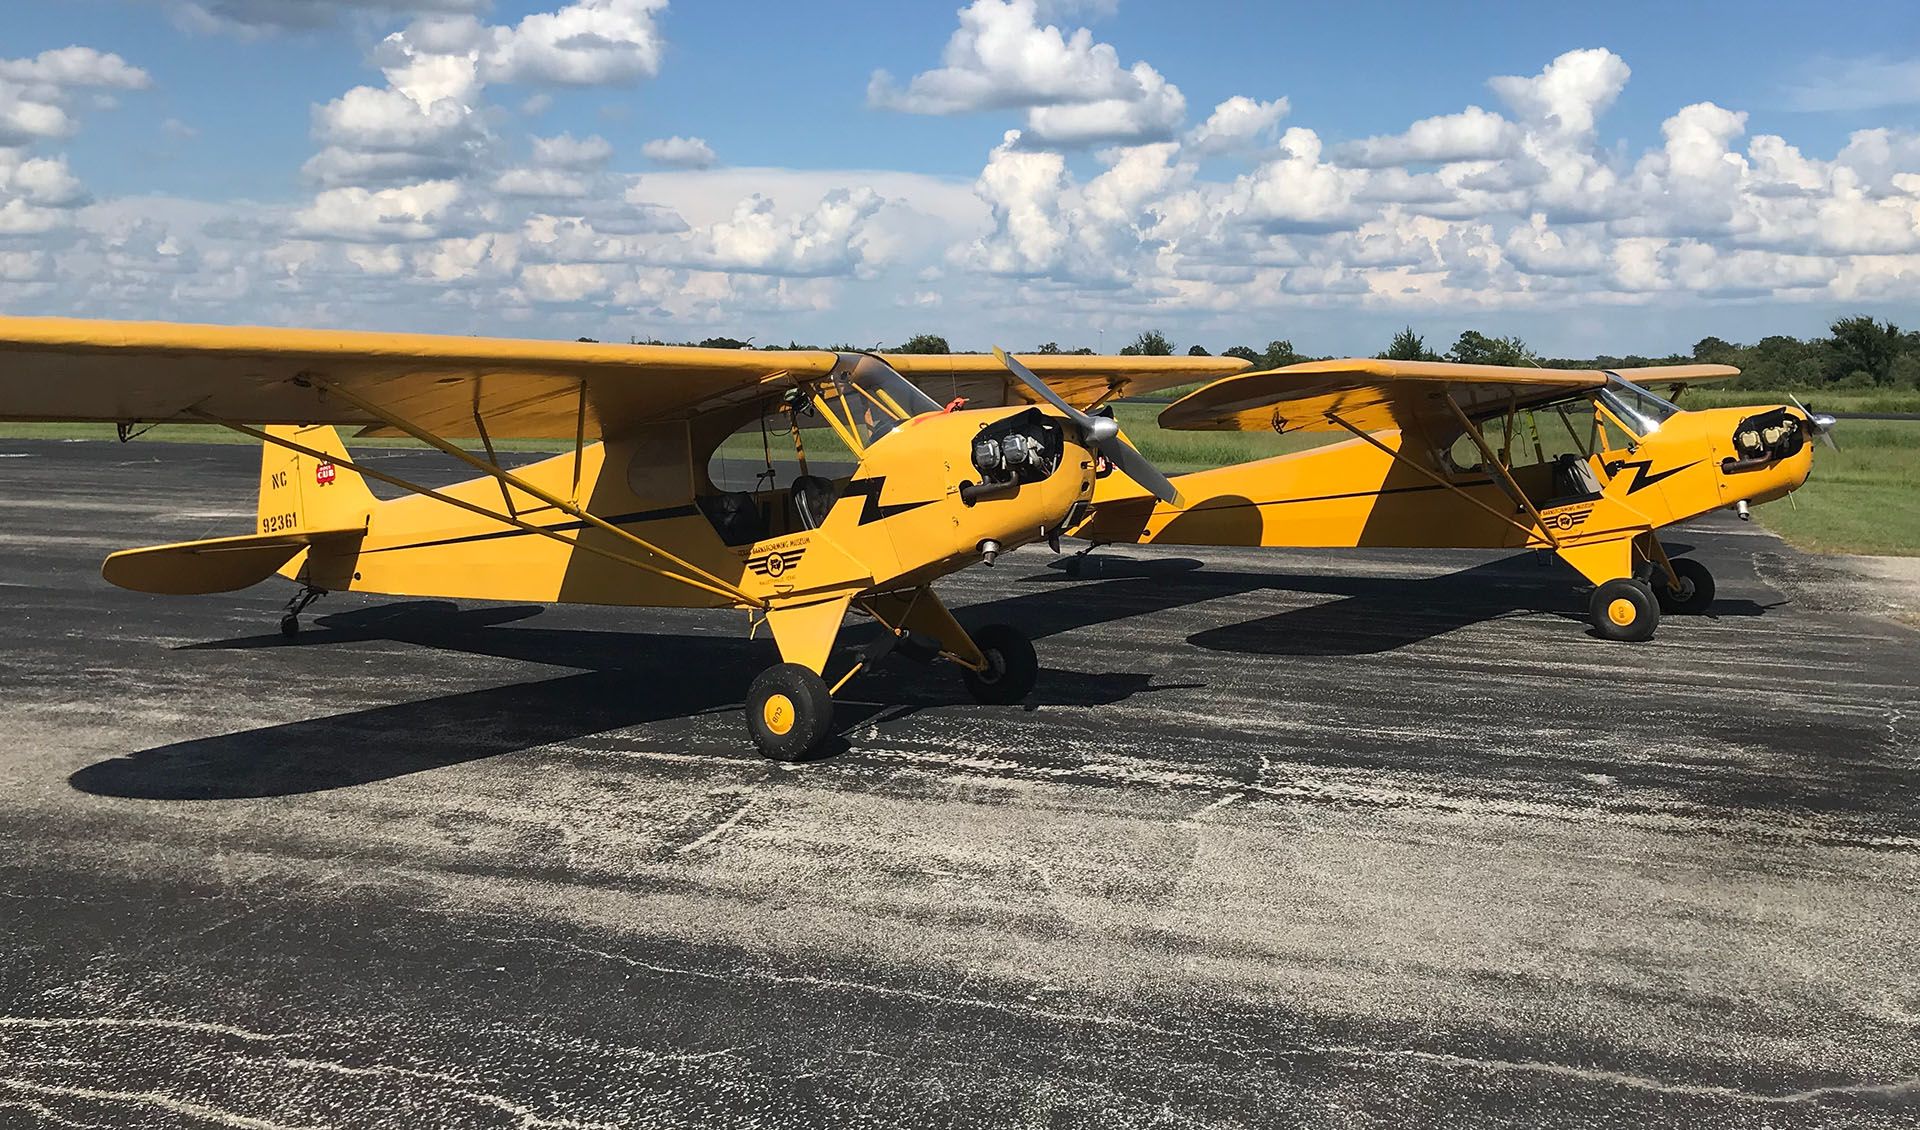 two yellow and black piper cub airplanes side by side on the taxiway